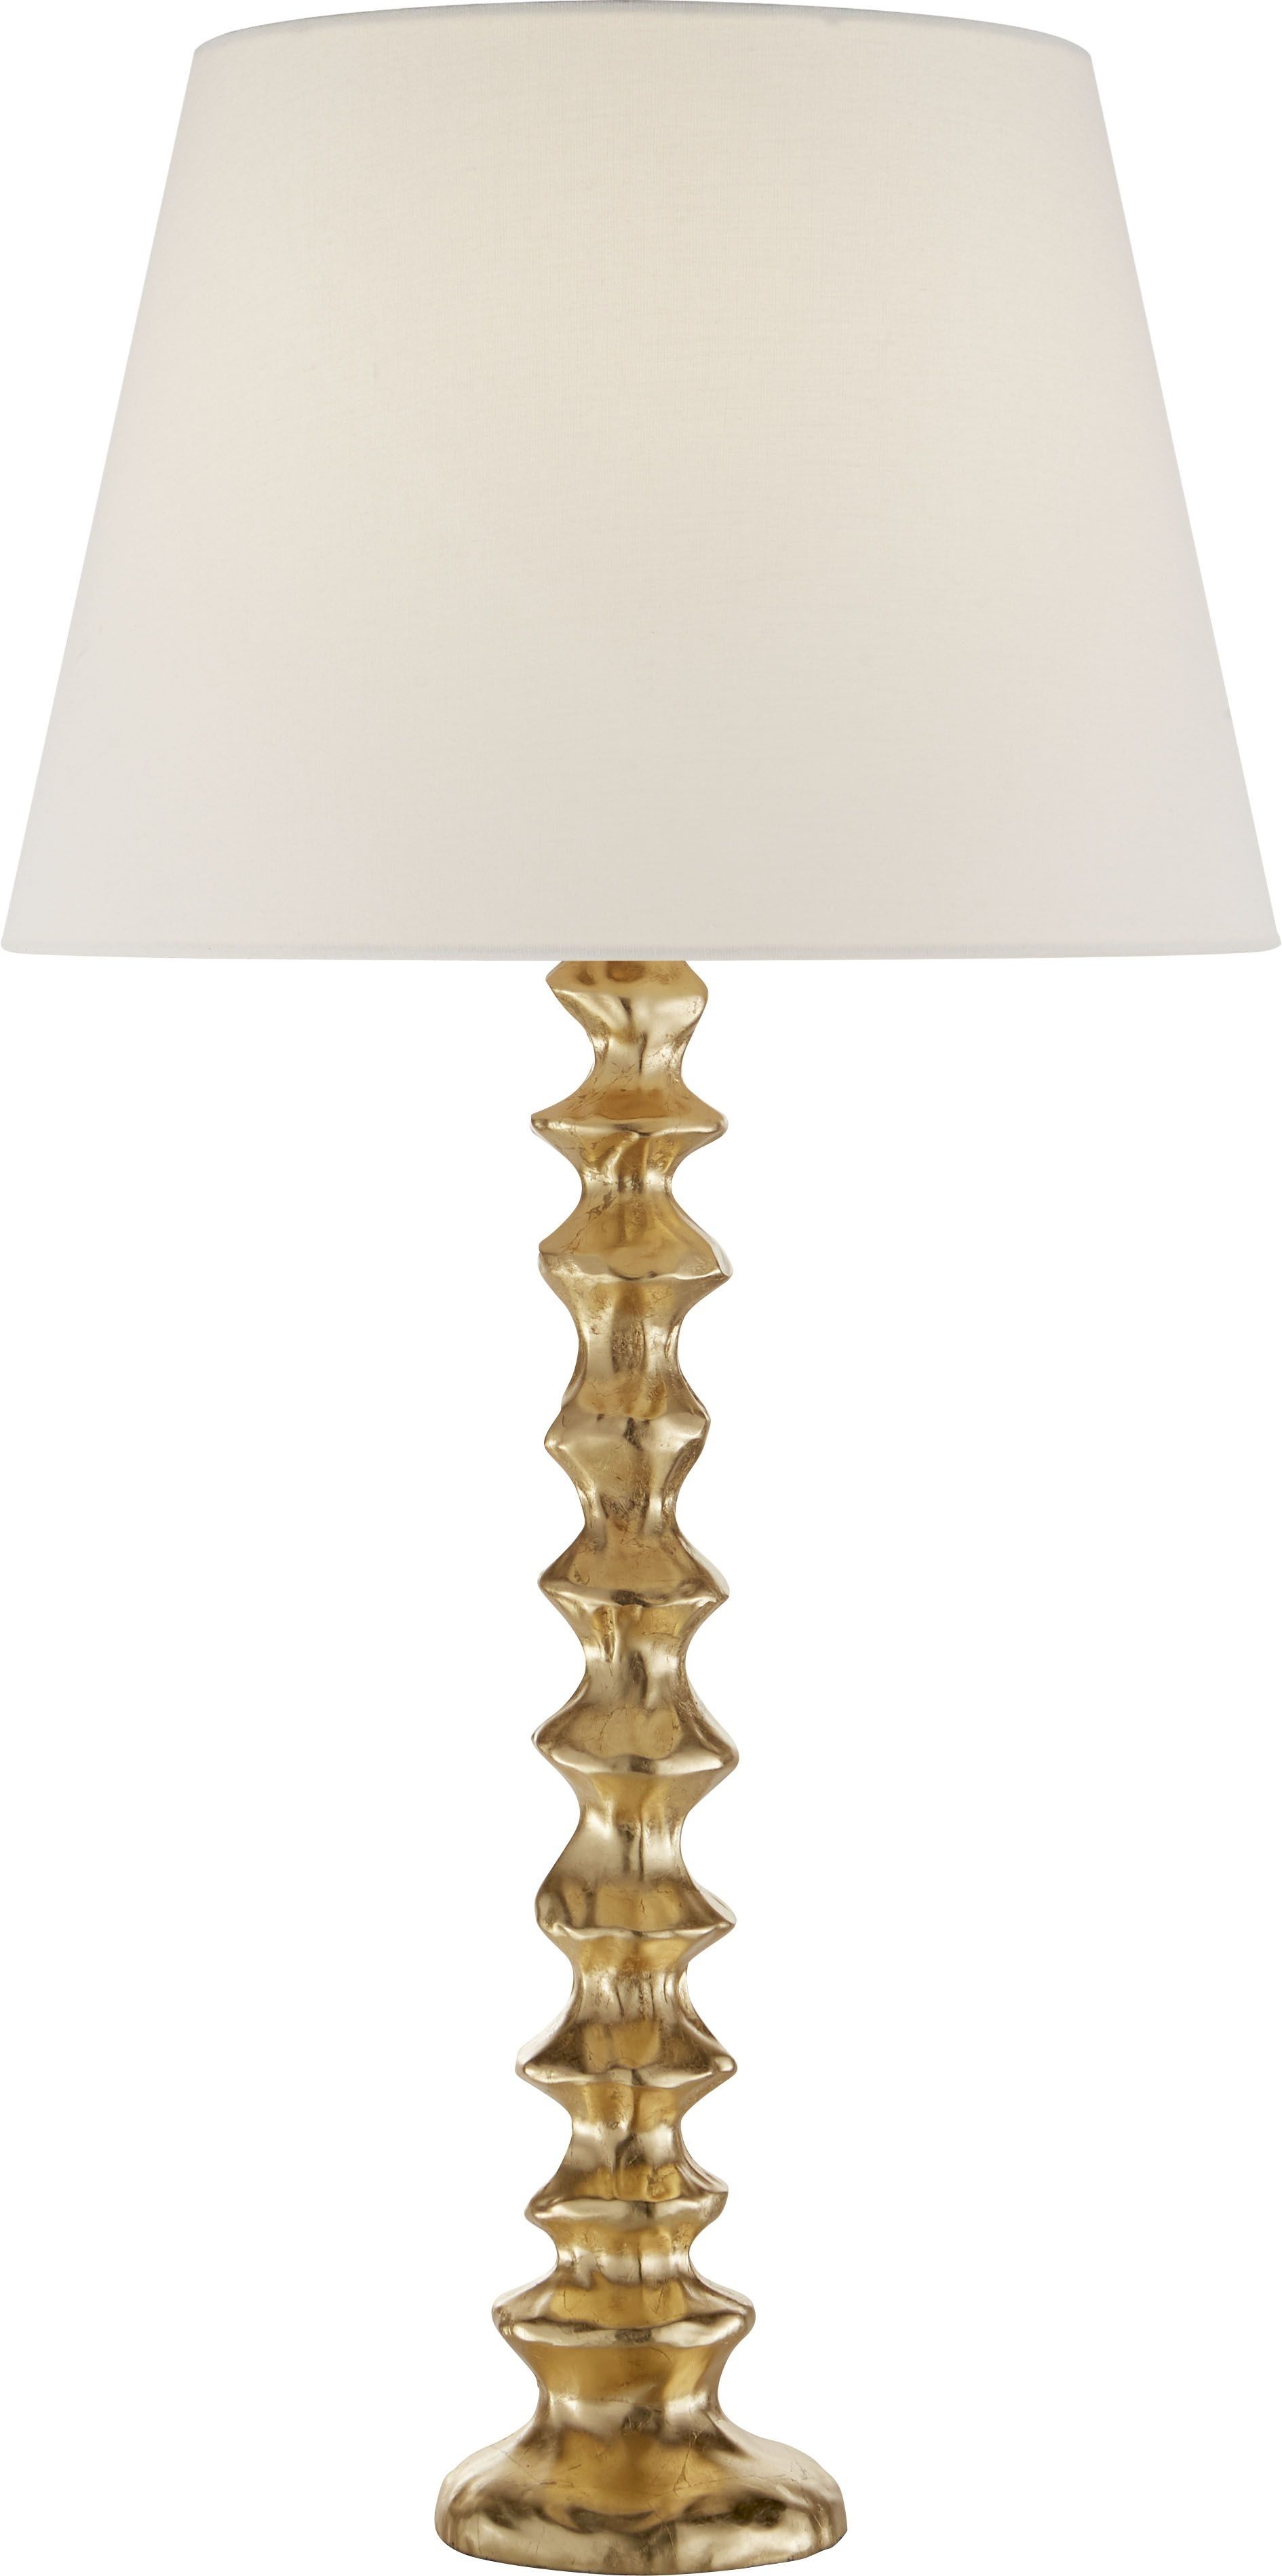 Furniture : Living Room Lamp Design Ashley Furniture Table Lamps Regarding Laura Ashley Table Lamps For Living Room (View 6 of 15)